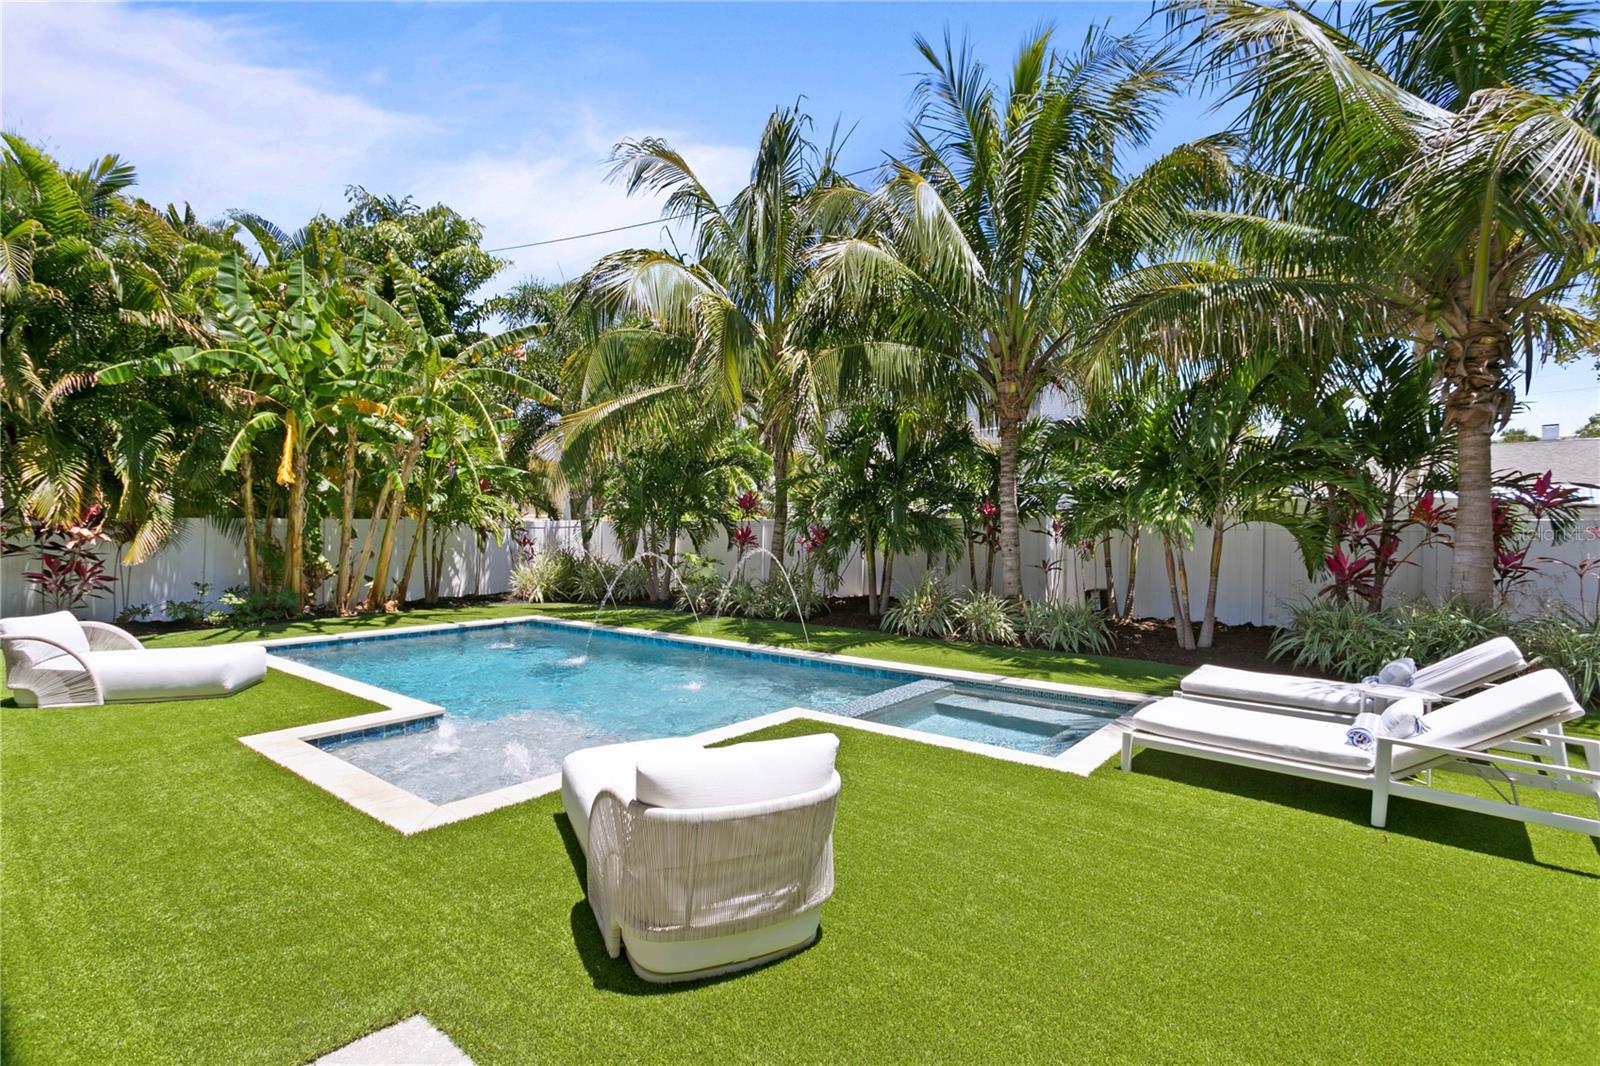 Oversized Private Backyard with heated saltwater pool, putting green and fruit trees